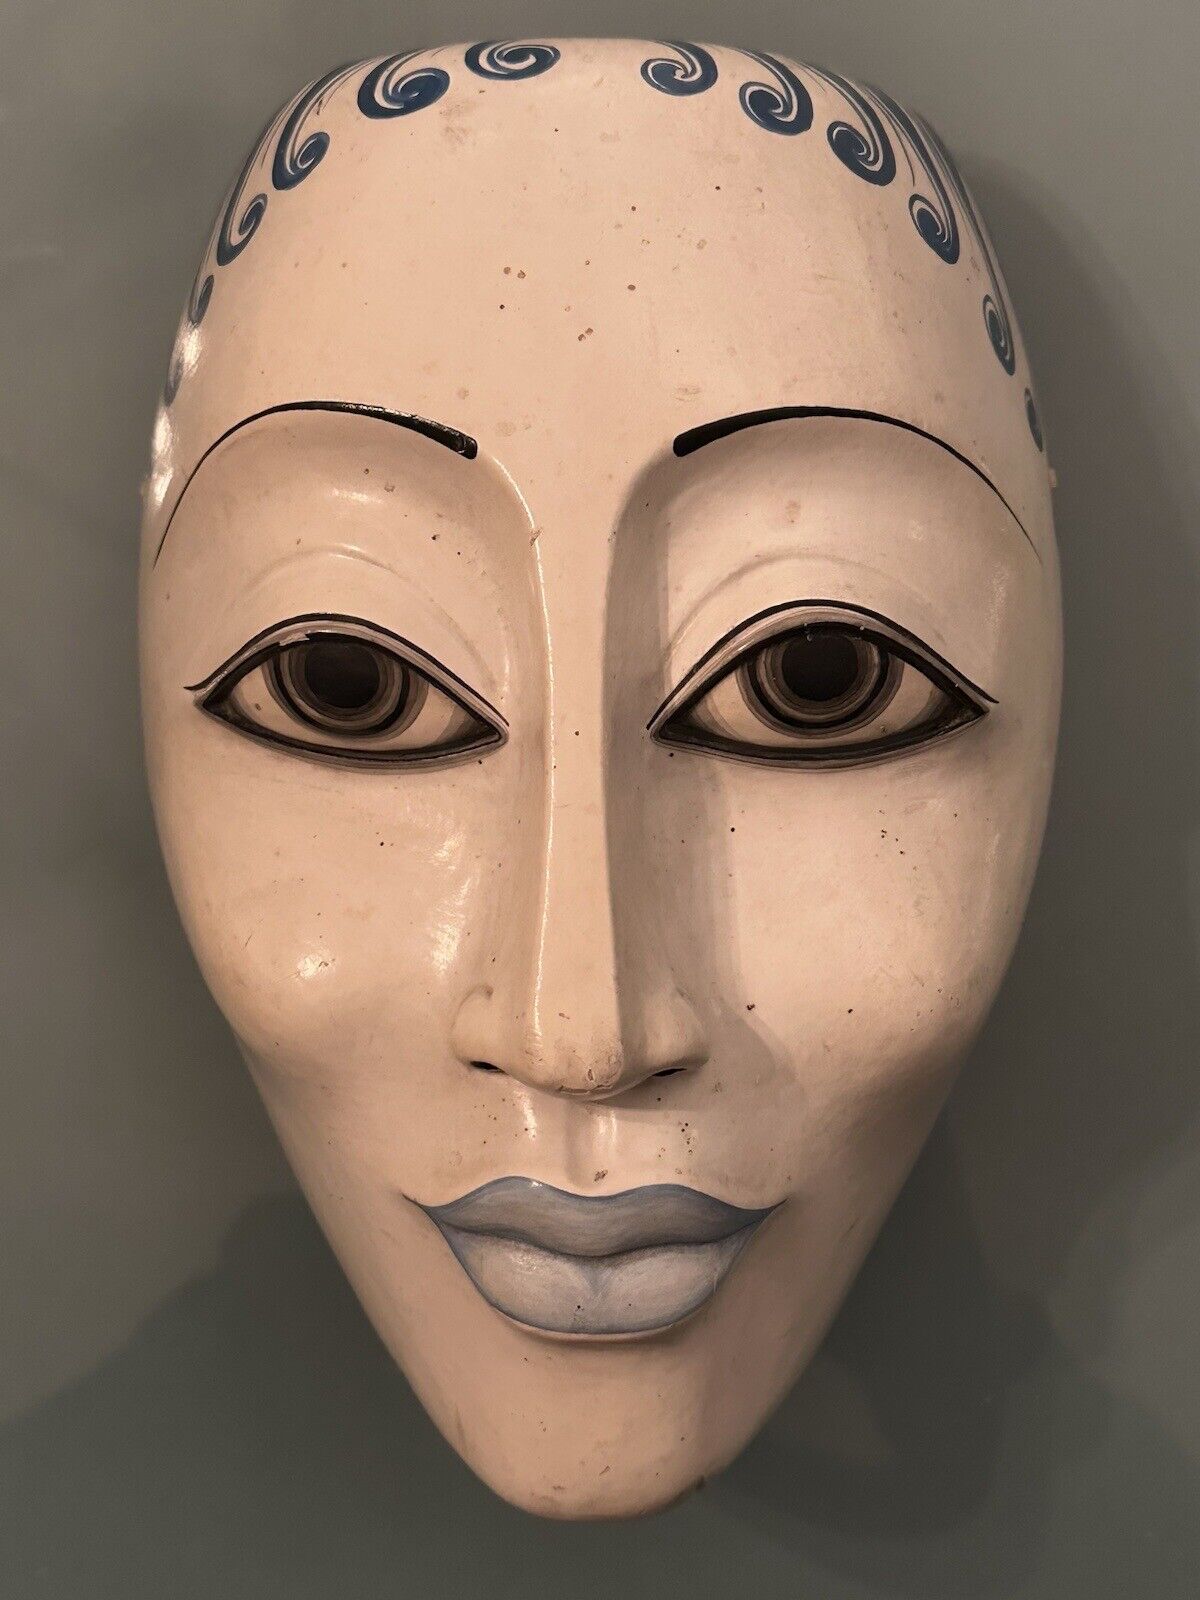 Sculpted Wood Balinese Woman “Moko” Dance Mask by Master Artist I B Anom